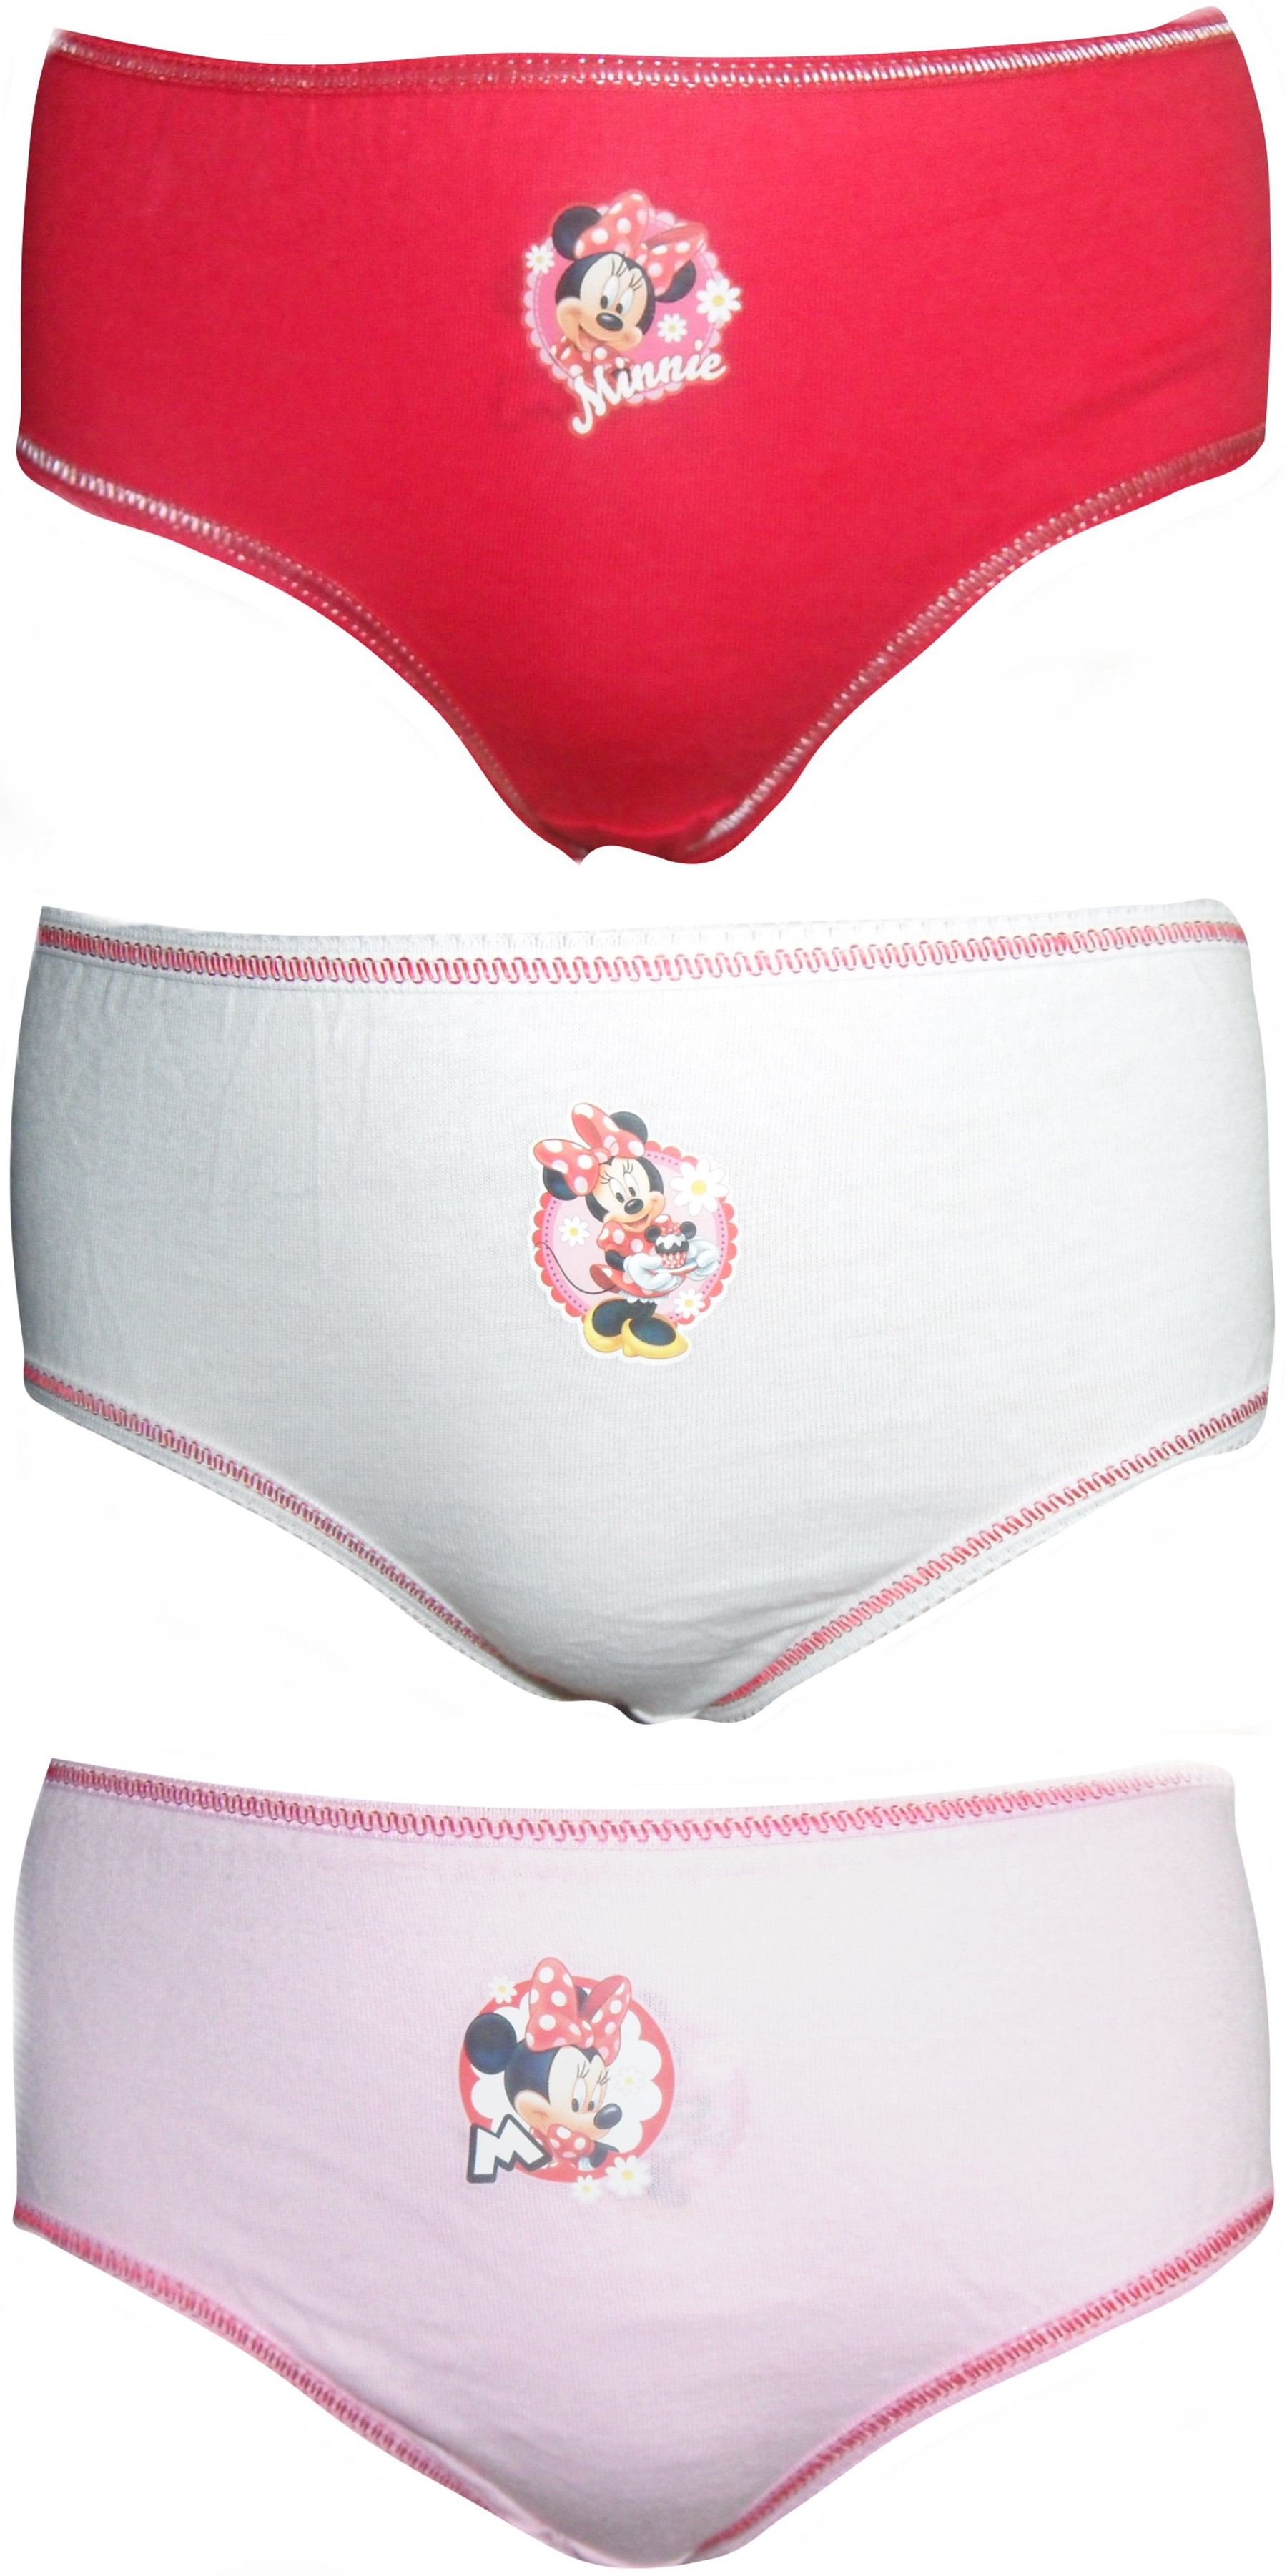 Minnie Mouse Knickers GUW32 a.jpg  by Thingimijigs